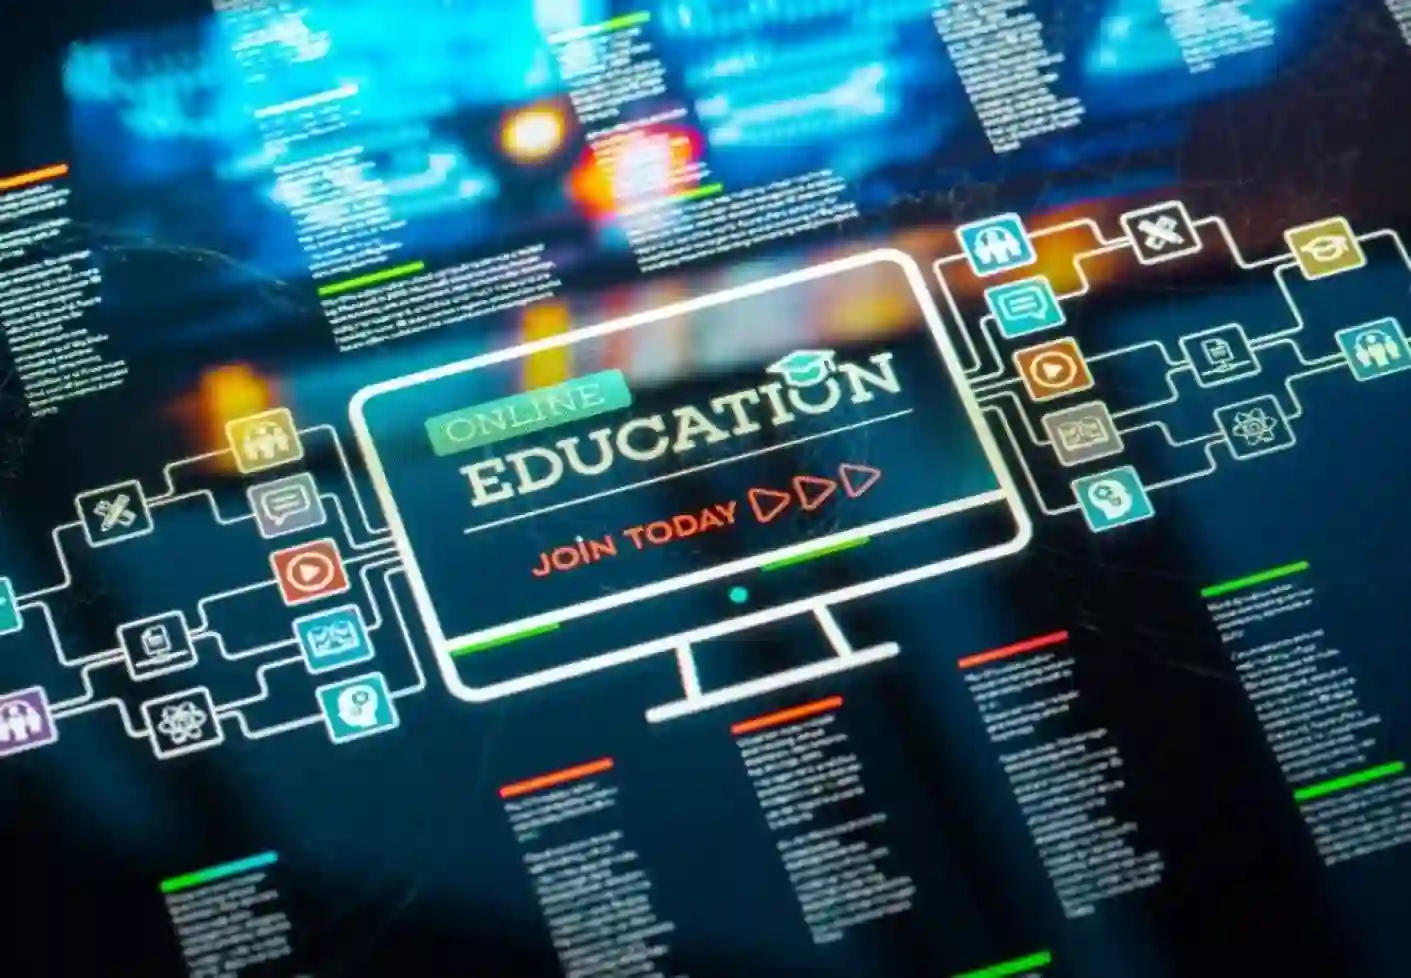 The Impact of technology in Higher education